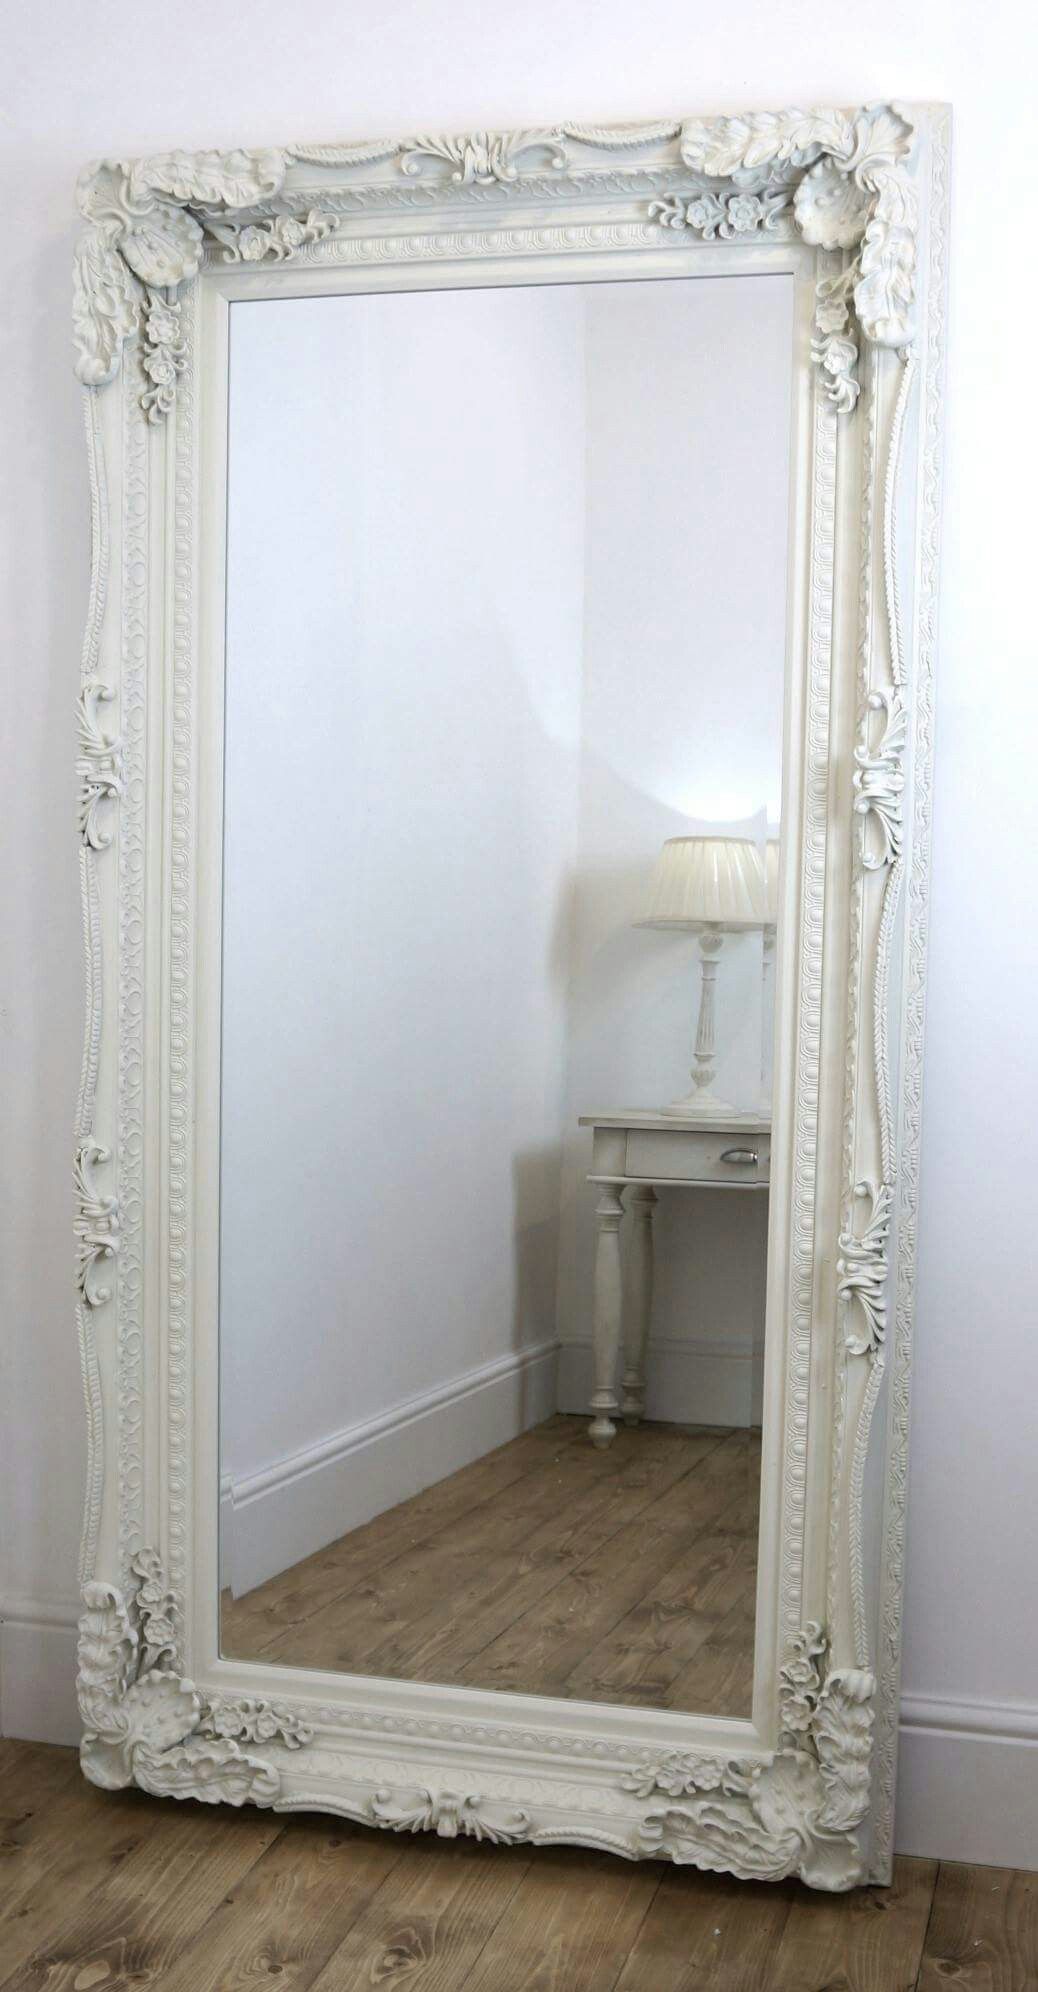 William Wood Home | French Bedroom Decor, White Ornate Mirror, Large Within White Wood Wall Mirrors (View 1 of 15)